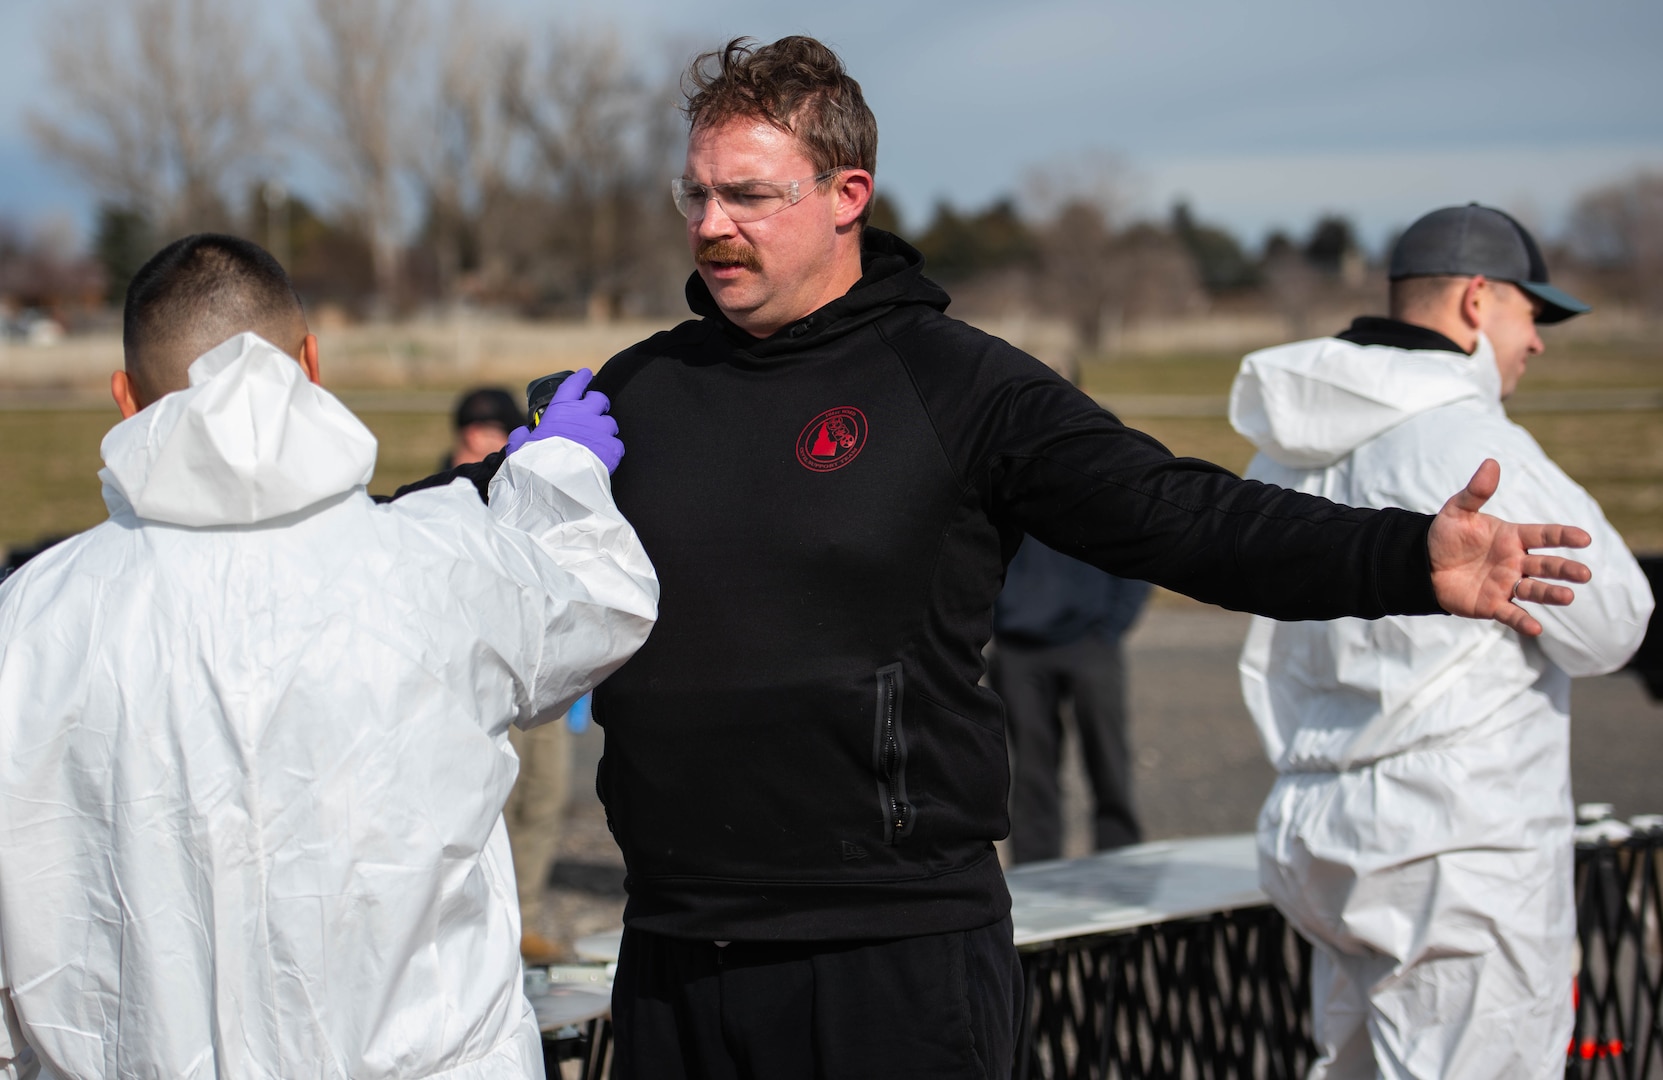 Sgt. Steven Jackson, 101st Weapons of Mass Destruction Civil Support Team, Idaho National Guard, goes through the decontamination process after exiting a notional “hot zone” during training with firefighters from the Bliss. Gooding and Hagerman Fire Departments. The CST’s community outreach program enhances the ability to work together in crises.